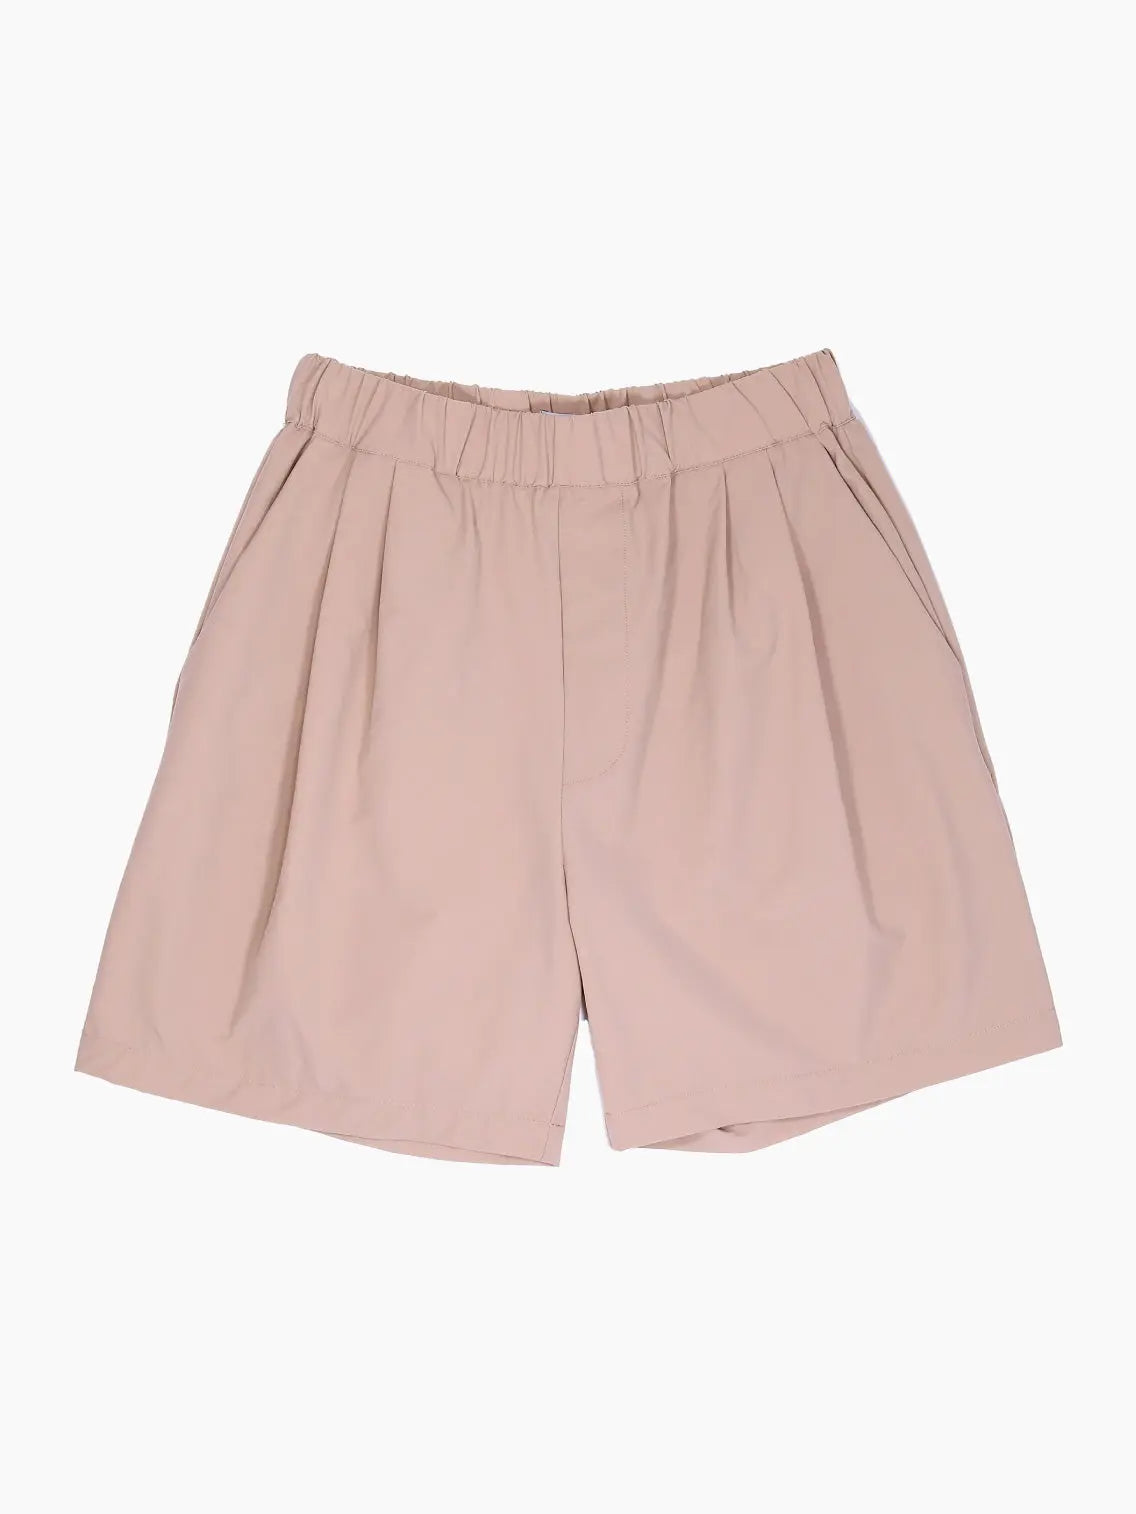 A pair of blush pink shorts with an elastic waistband and pleated front. The shorts are made from a light, flowy fabric and have a relaxed fit, perfect for casual wear. Discover Mundaka's Oversized Bermuda Beige at our Barcelona store for a chic addition to your wardrobe.